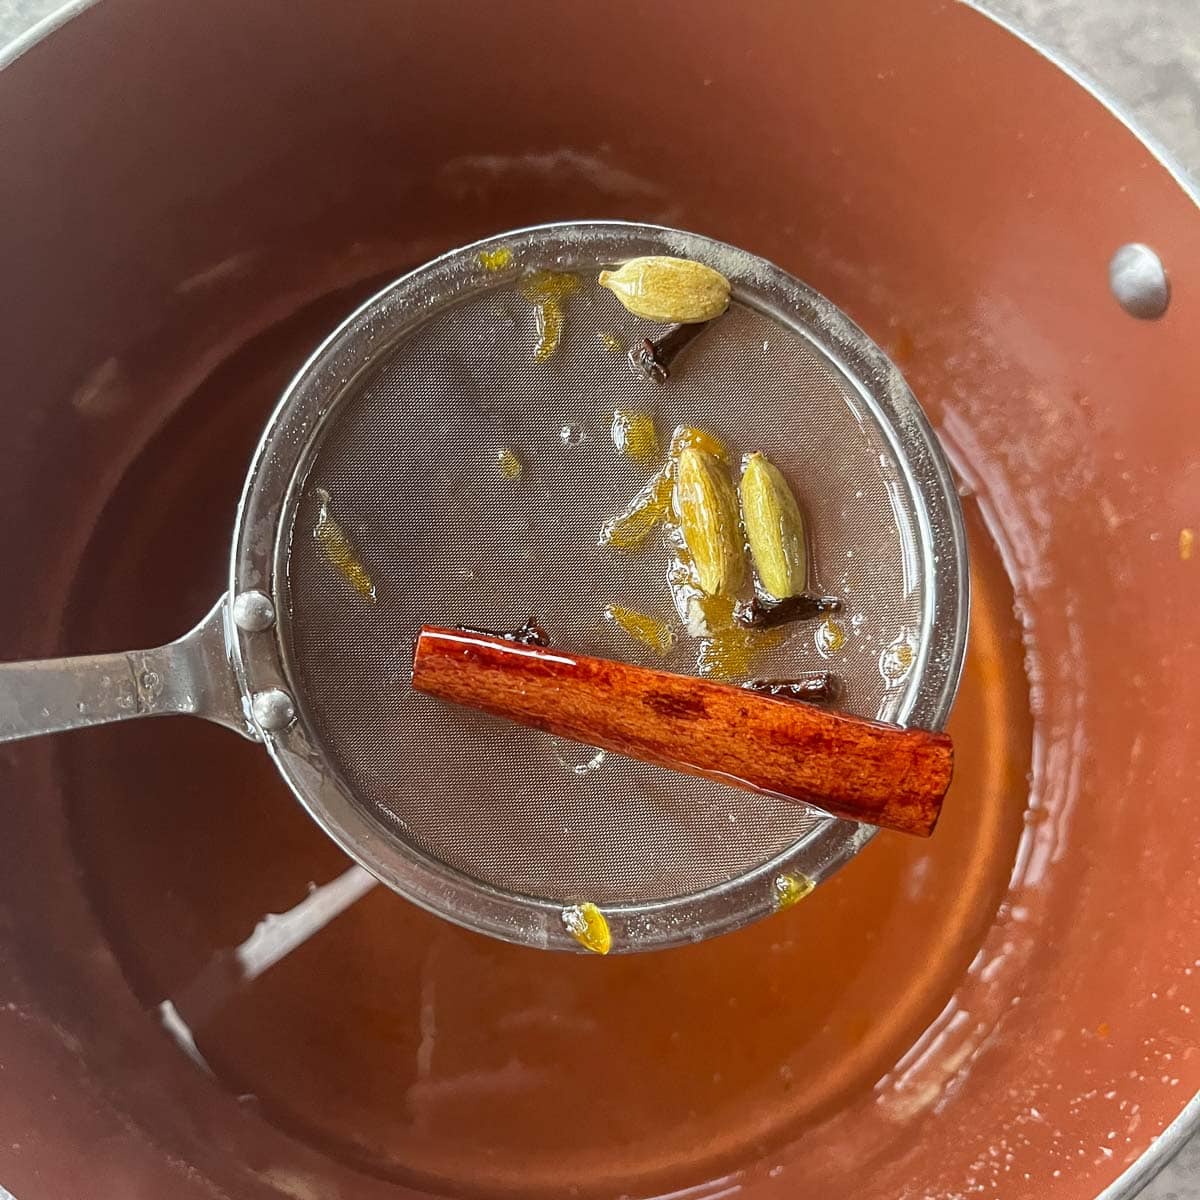 removing spices from a pot of syrup